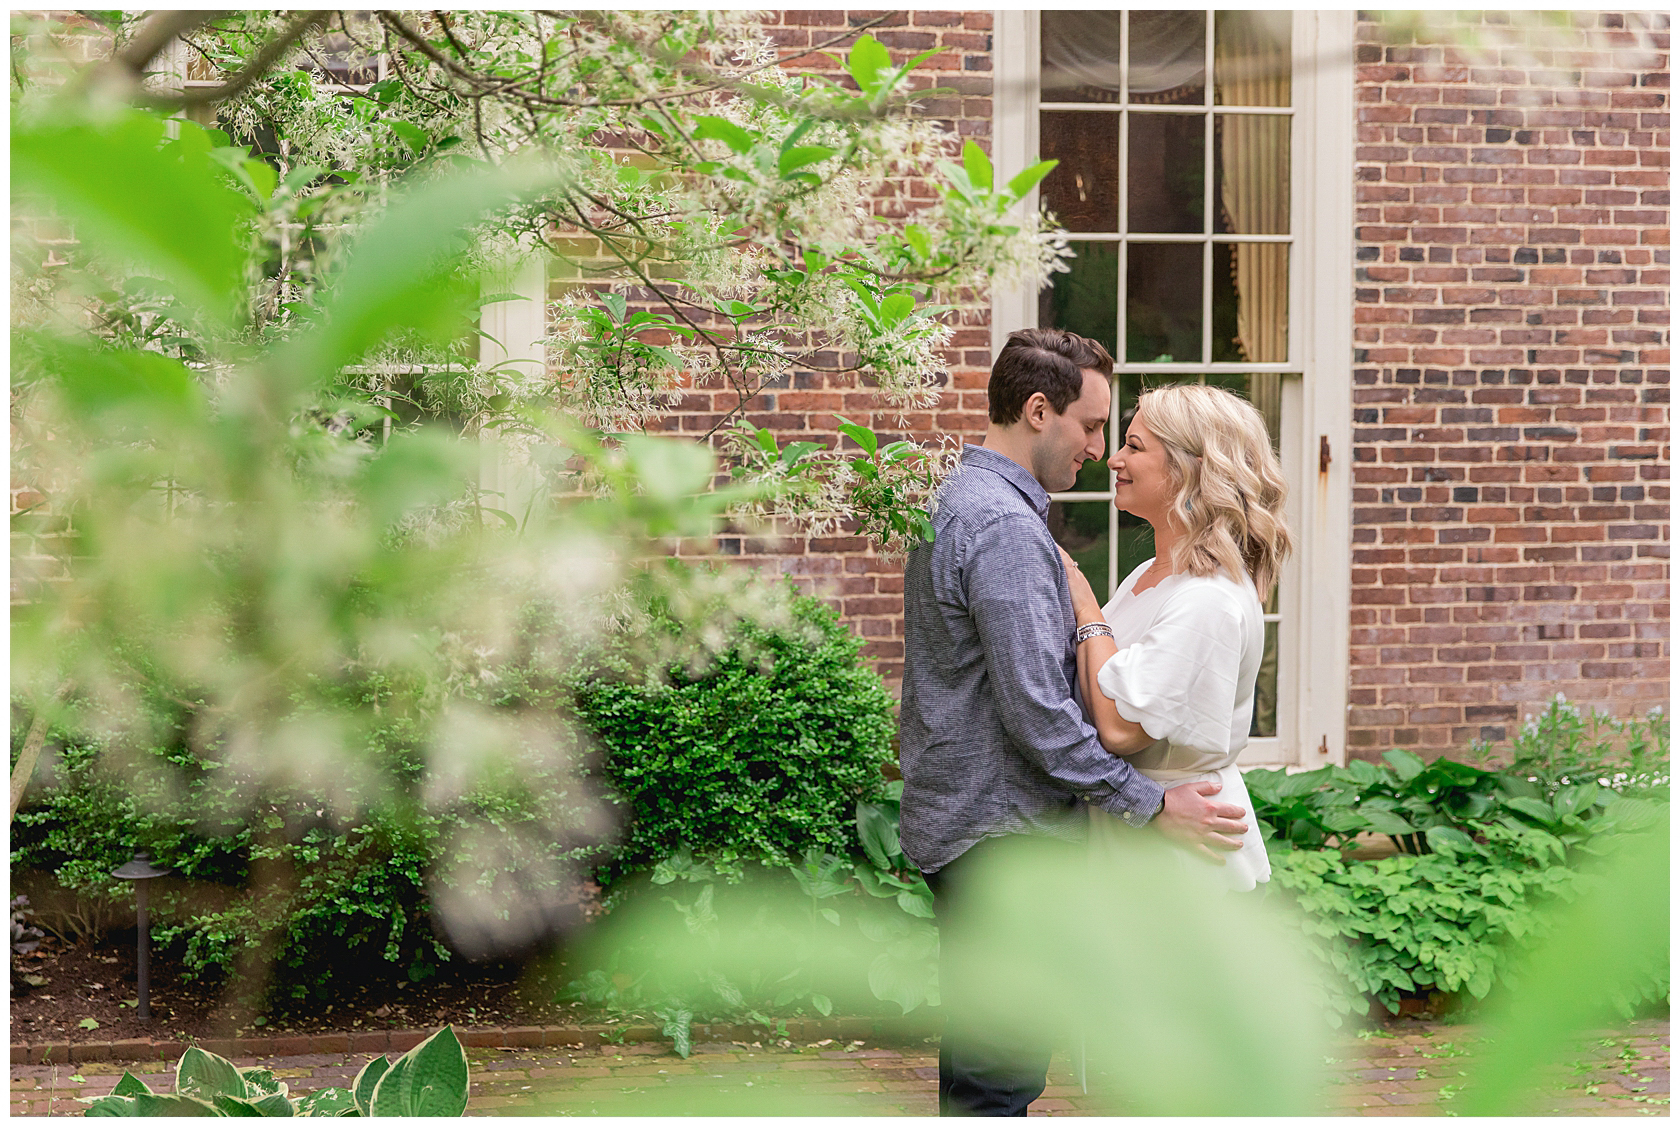 Downtown Summer Engagement Session at Gratz Park by Kevin and Anna Photography